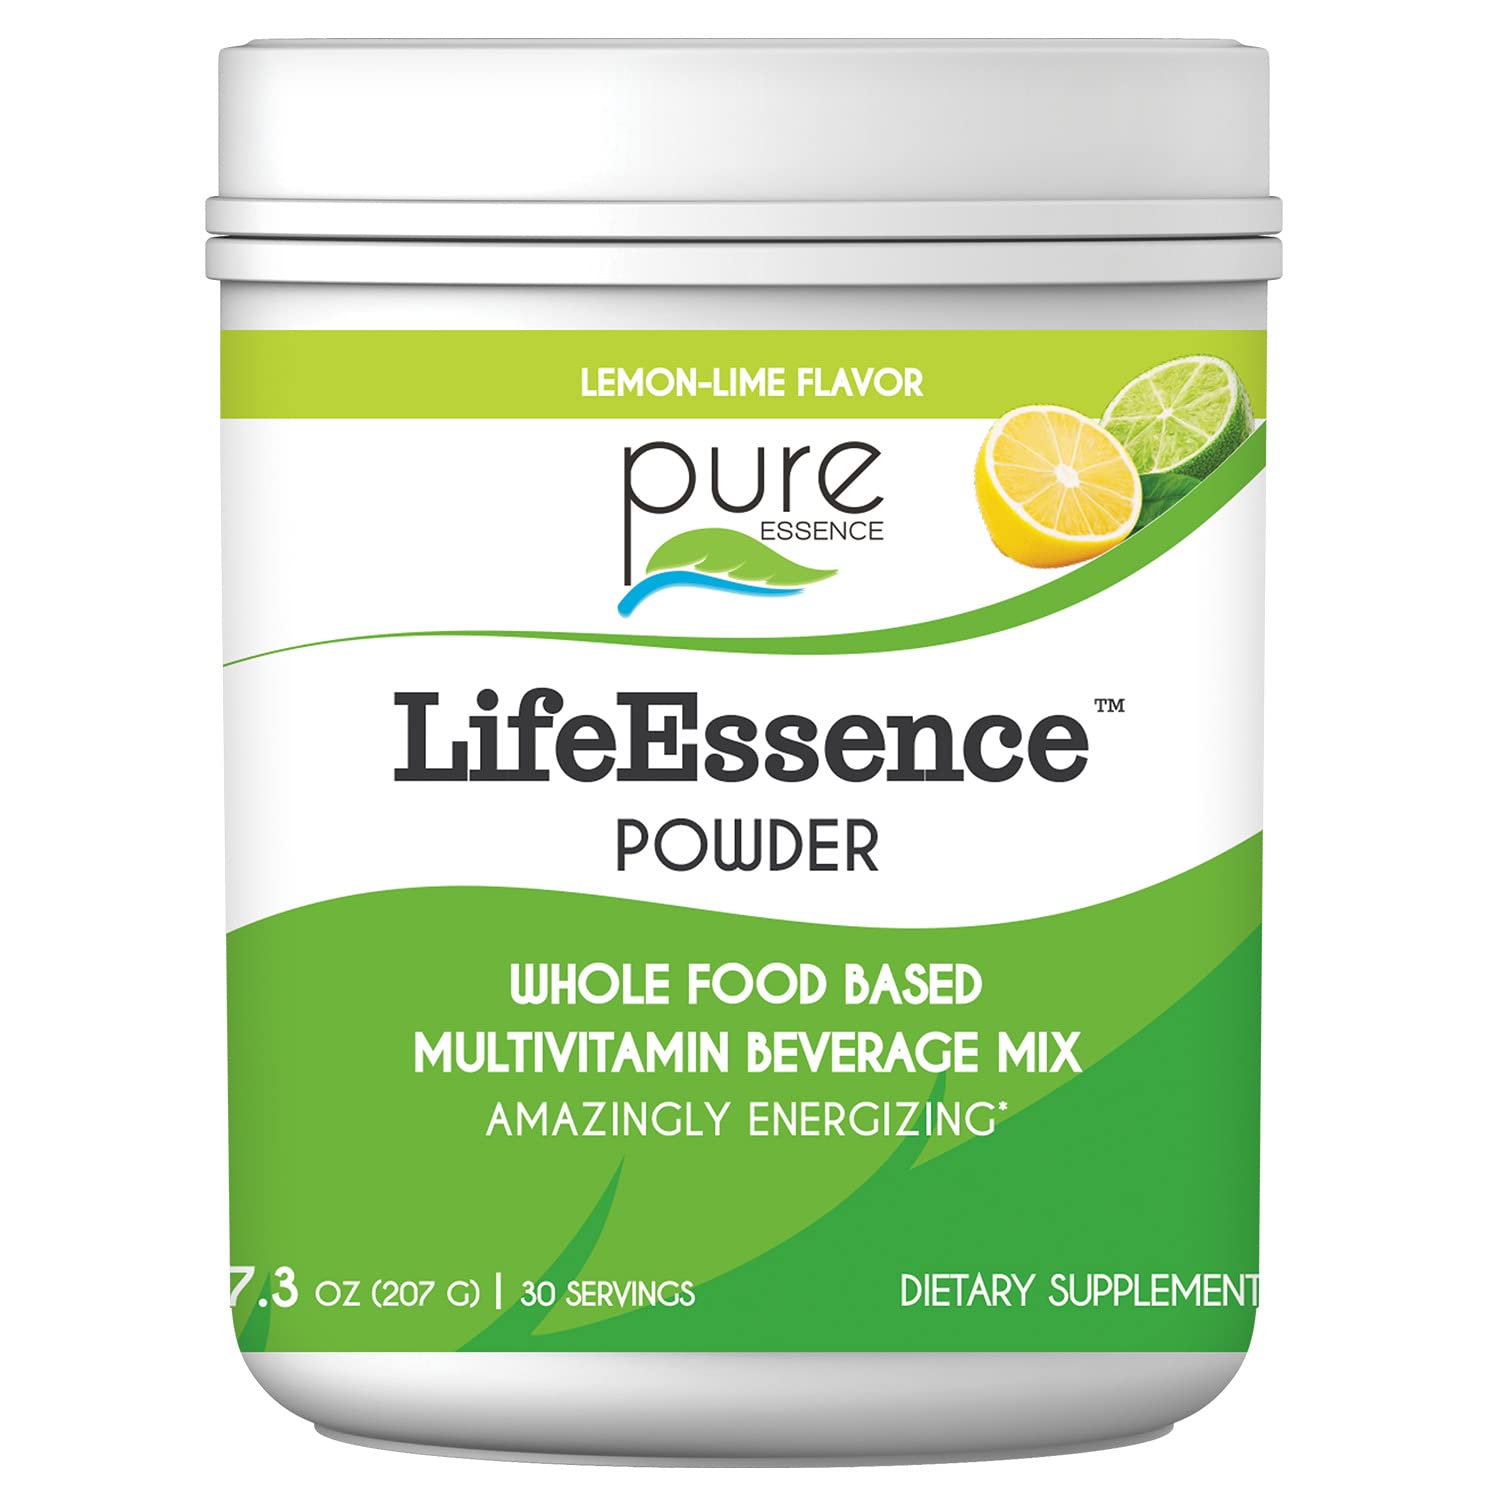  Pure Essence Labs LifeEssence Multivitamin Powder for Men and  Women, Natural Herbal Supplement with Vitamin D3, B12, and Biotin,  Energizing Whole Food Based Powder Mix, 7.3 oz : Health & Household